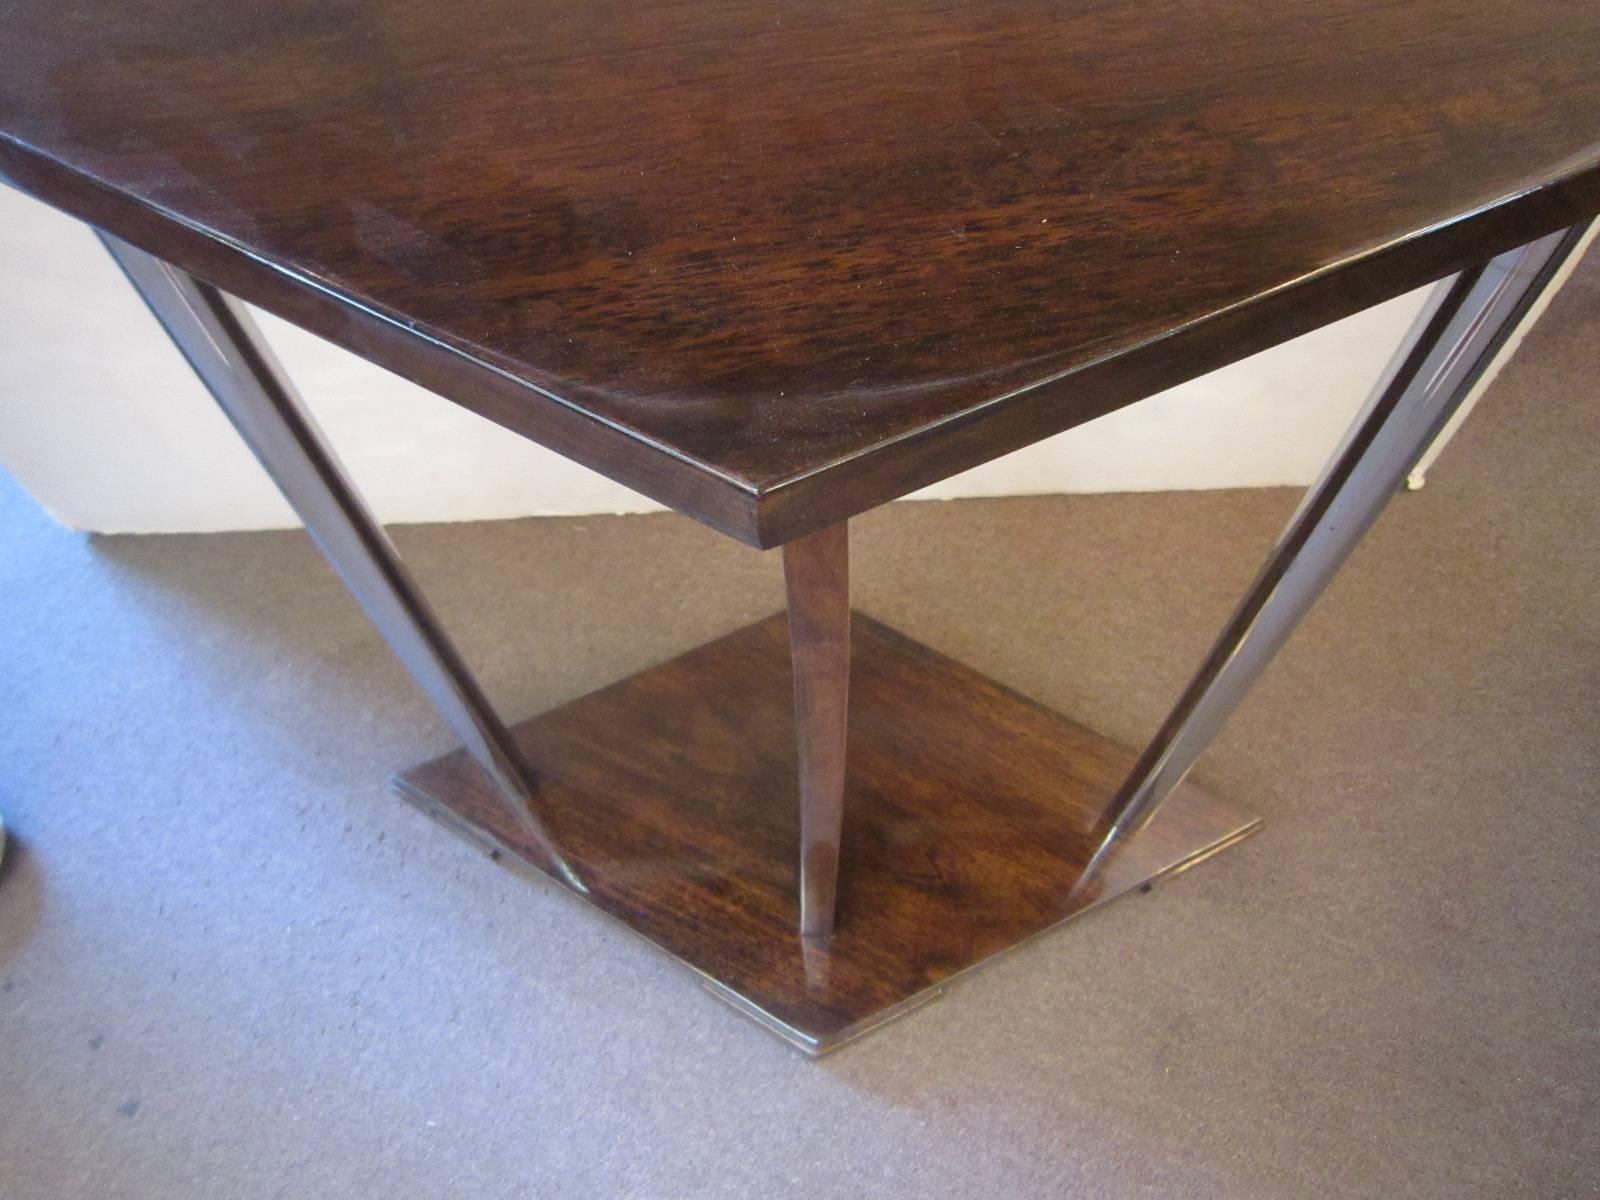 French Art Deco Unusual Diamond Shaped Walnut Side Table with Nickel Supports For Sale 8